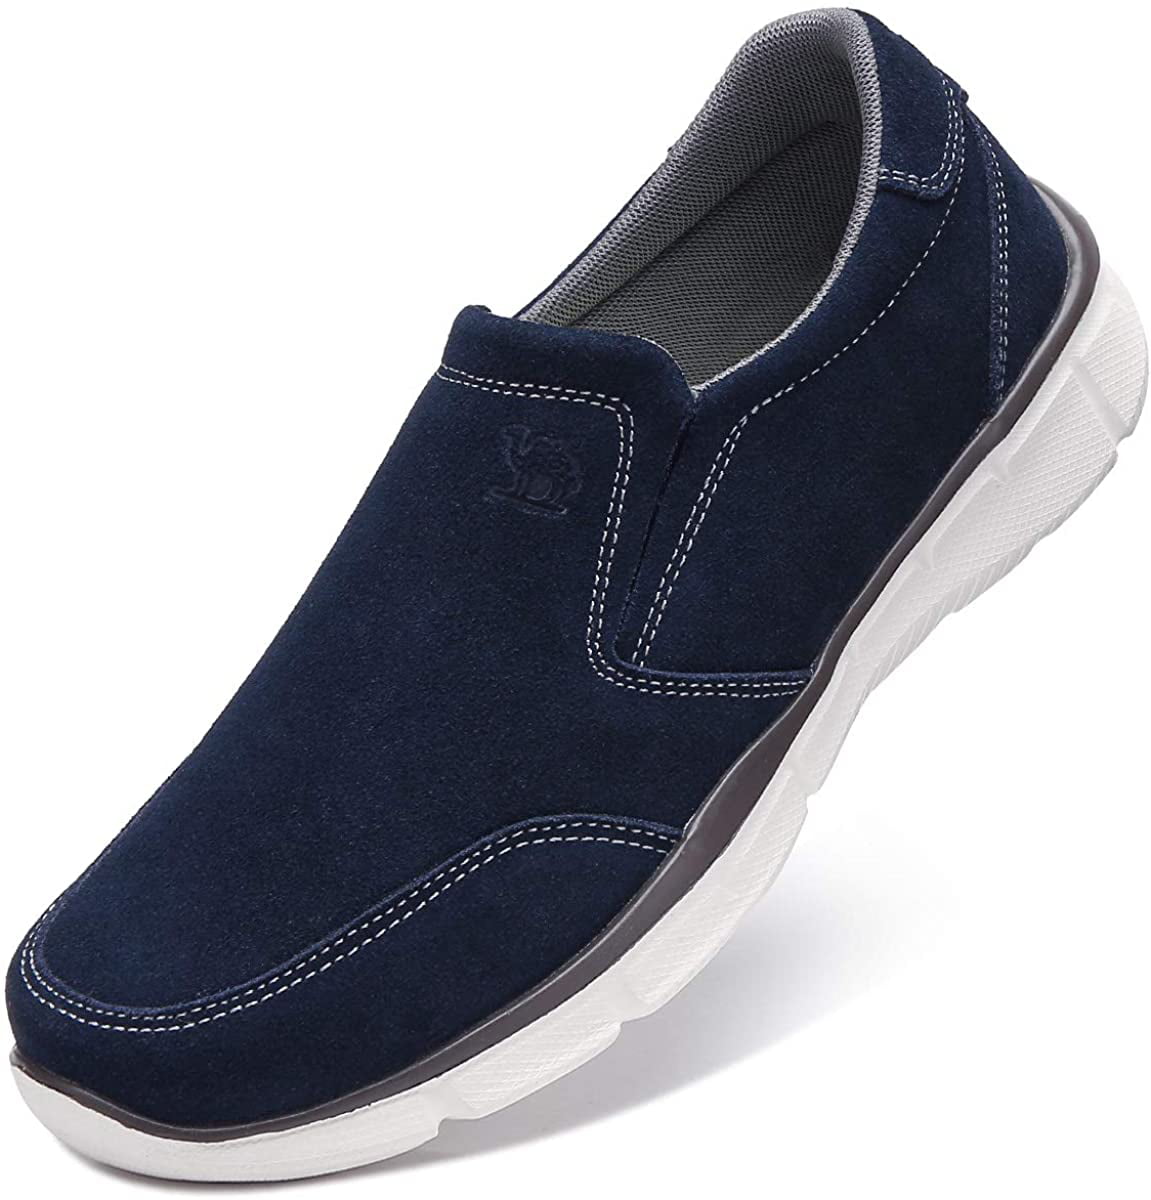 FidgetGear Mens Fashion Casual Moccasin Slip On Loafers Driving Canvas Casual Walking Shoes Blue 6.5